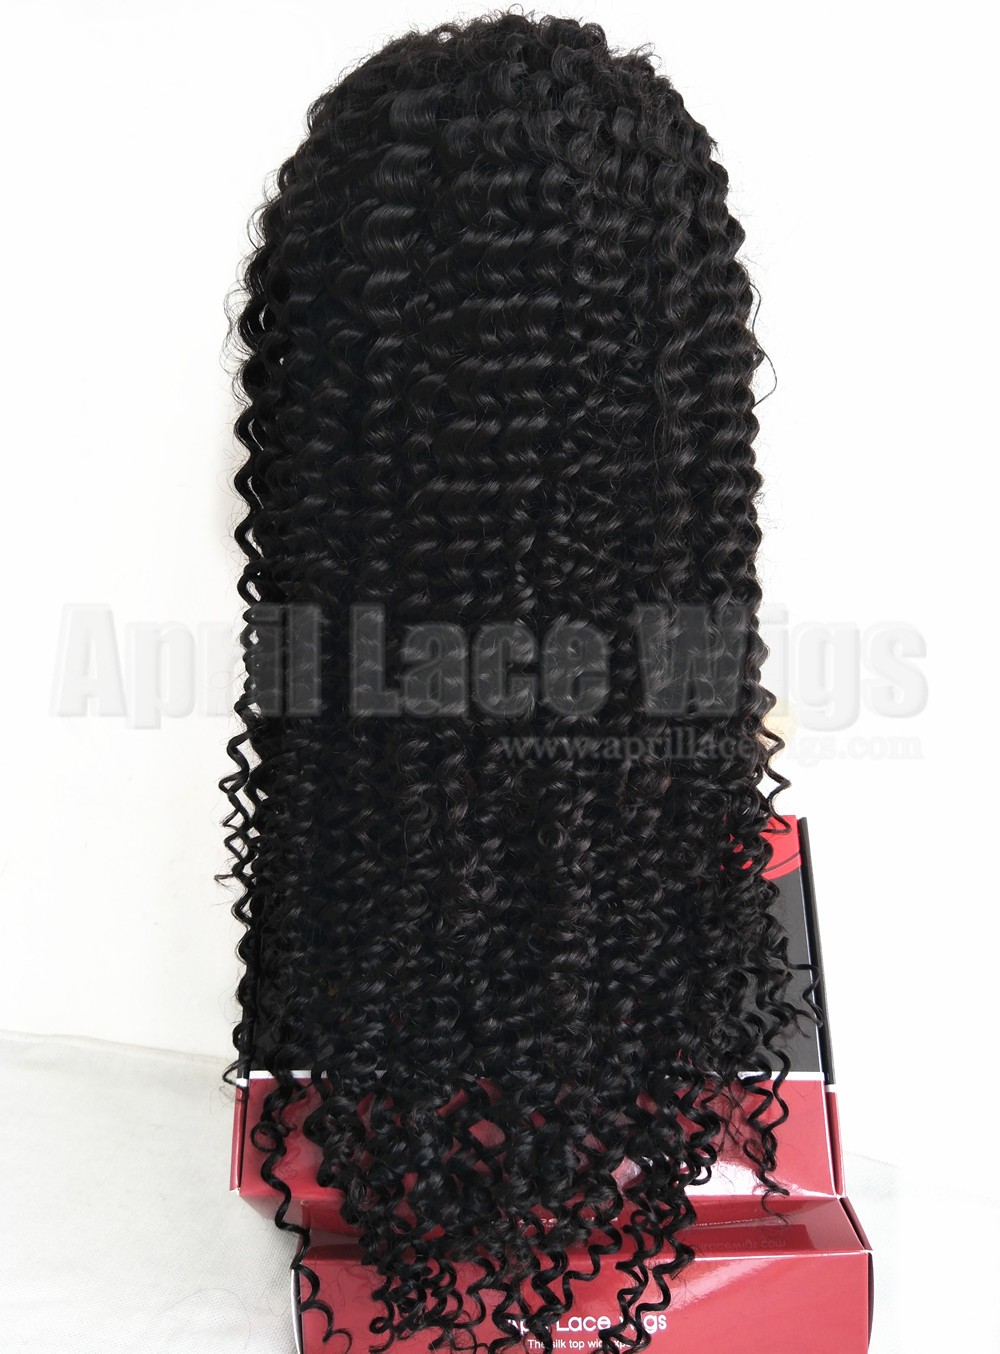 Spanish curly 360 lace wig